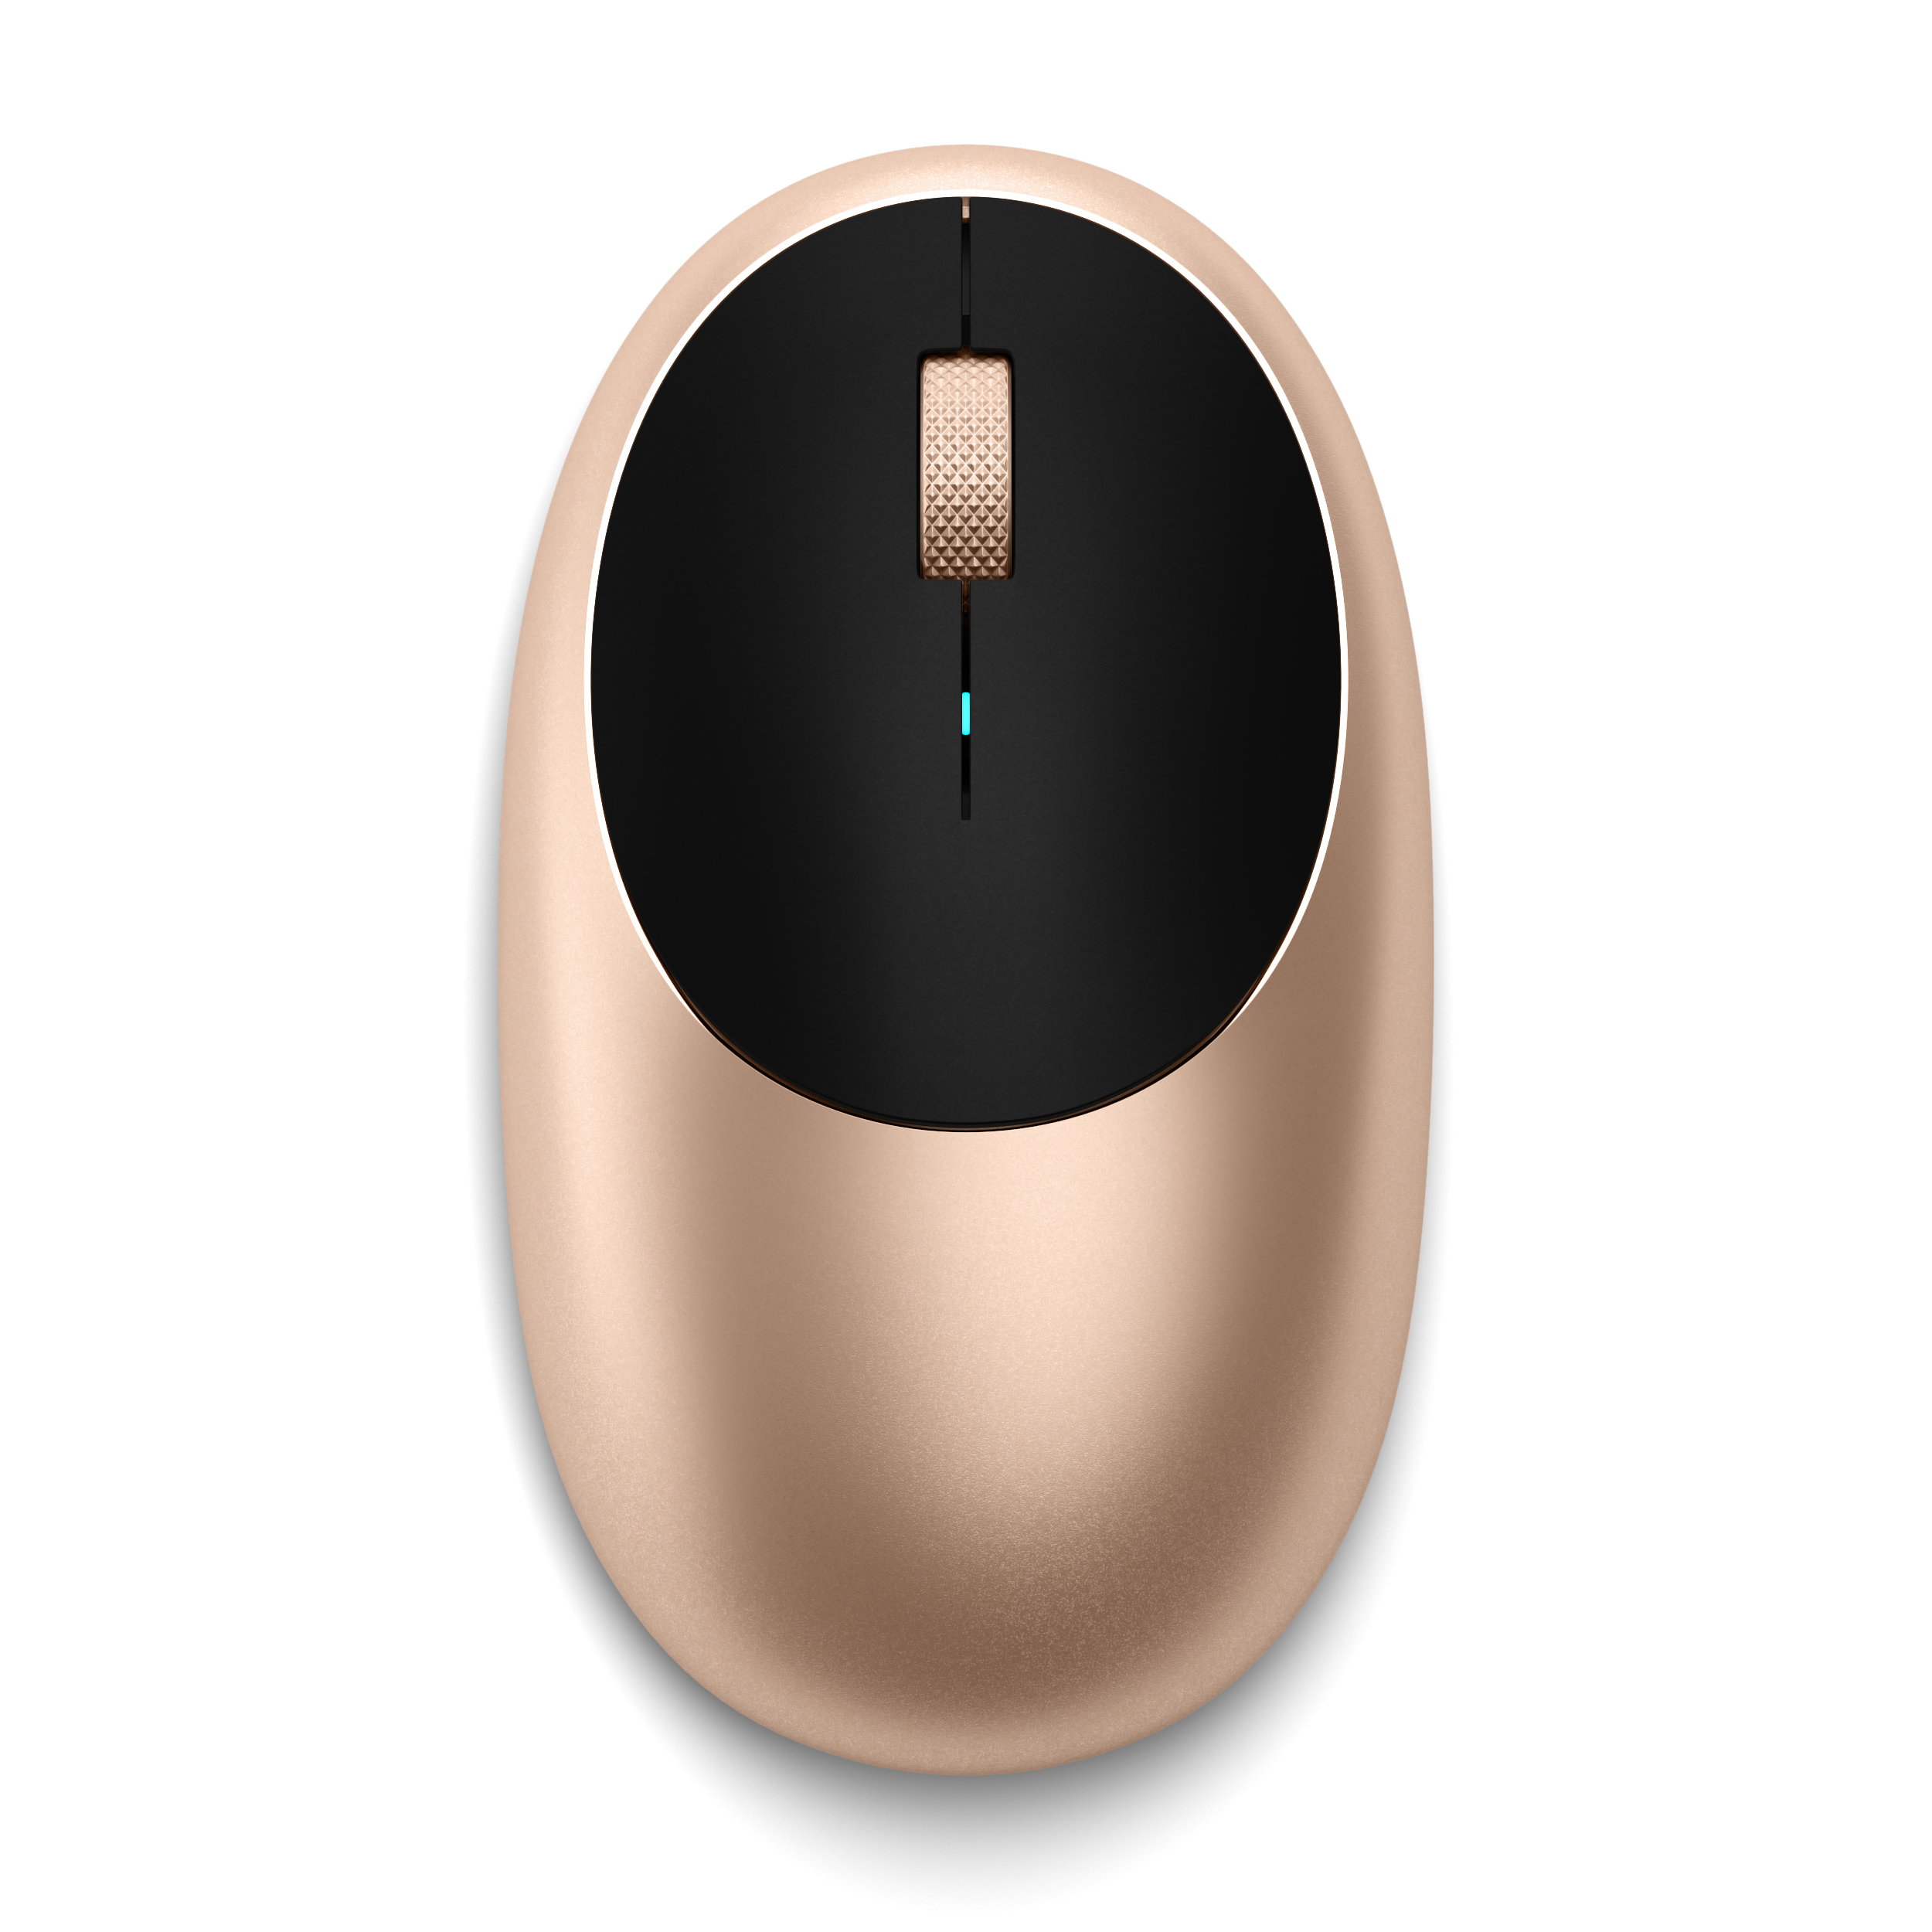 SATECHI M1 Wireless Wireless - Gold Bluetooth Mouse, Mouse Gold